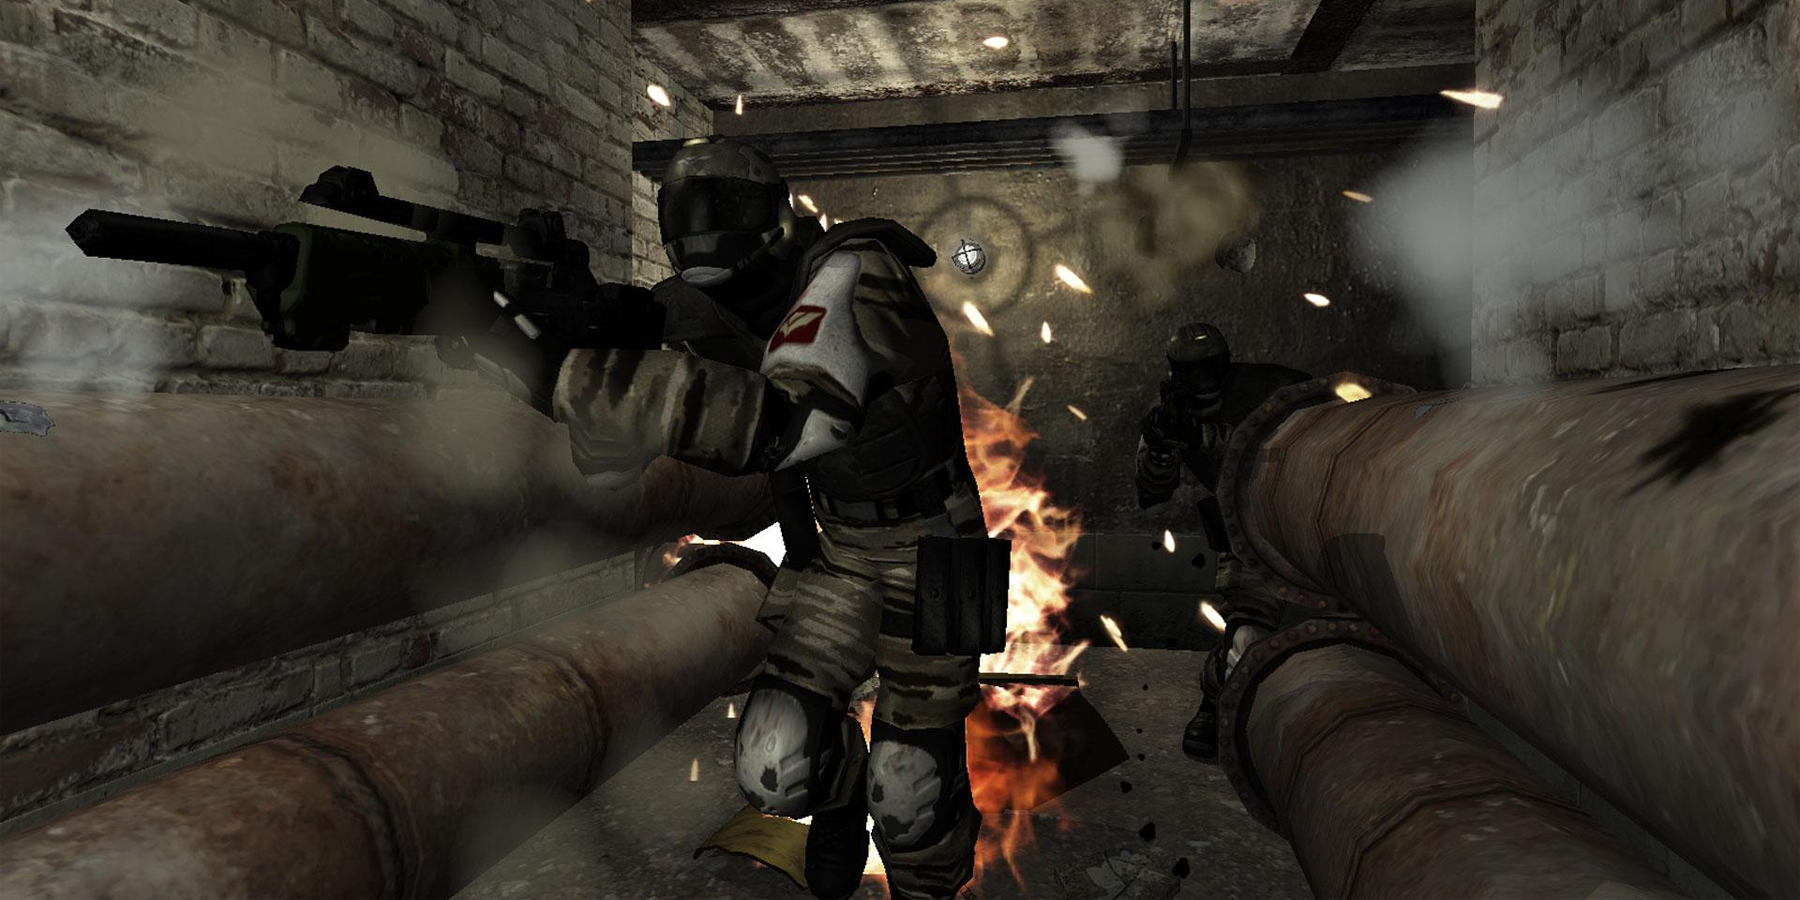 F.E.A.R. soldiers running down a hallway with pipes